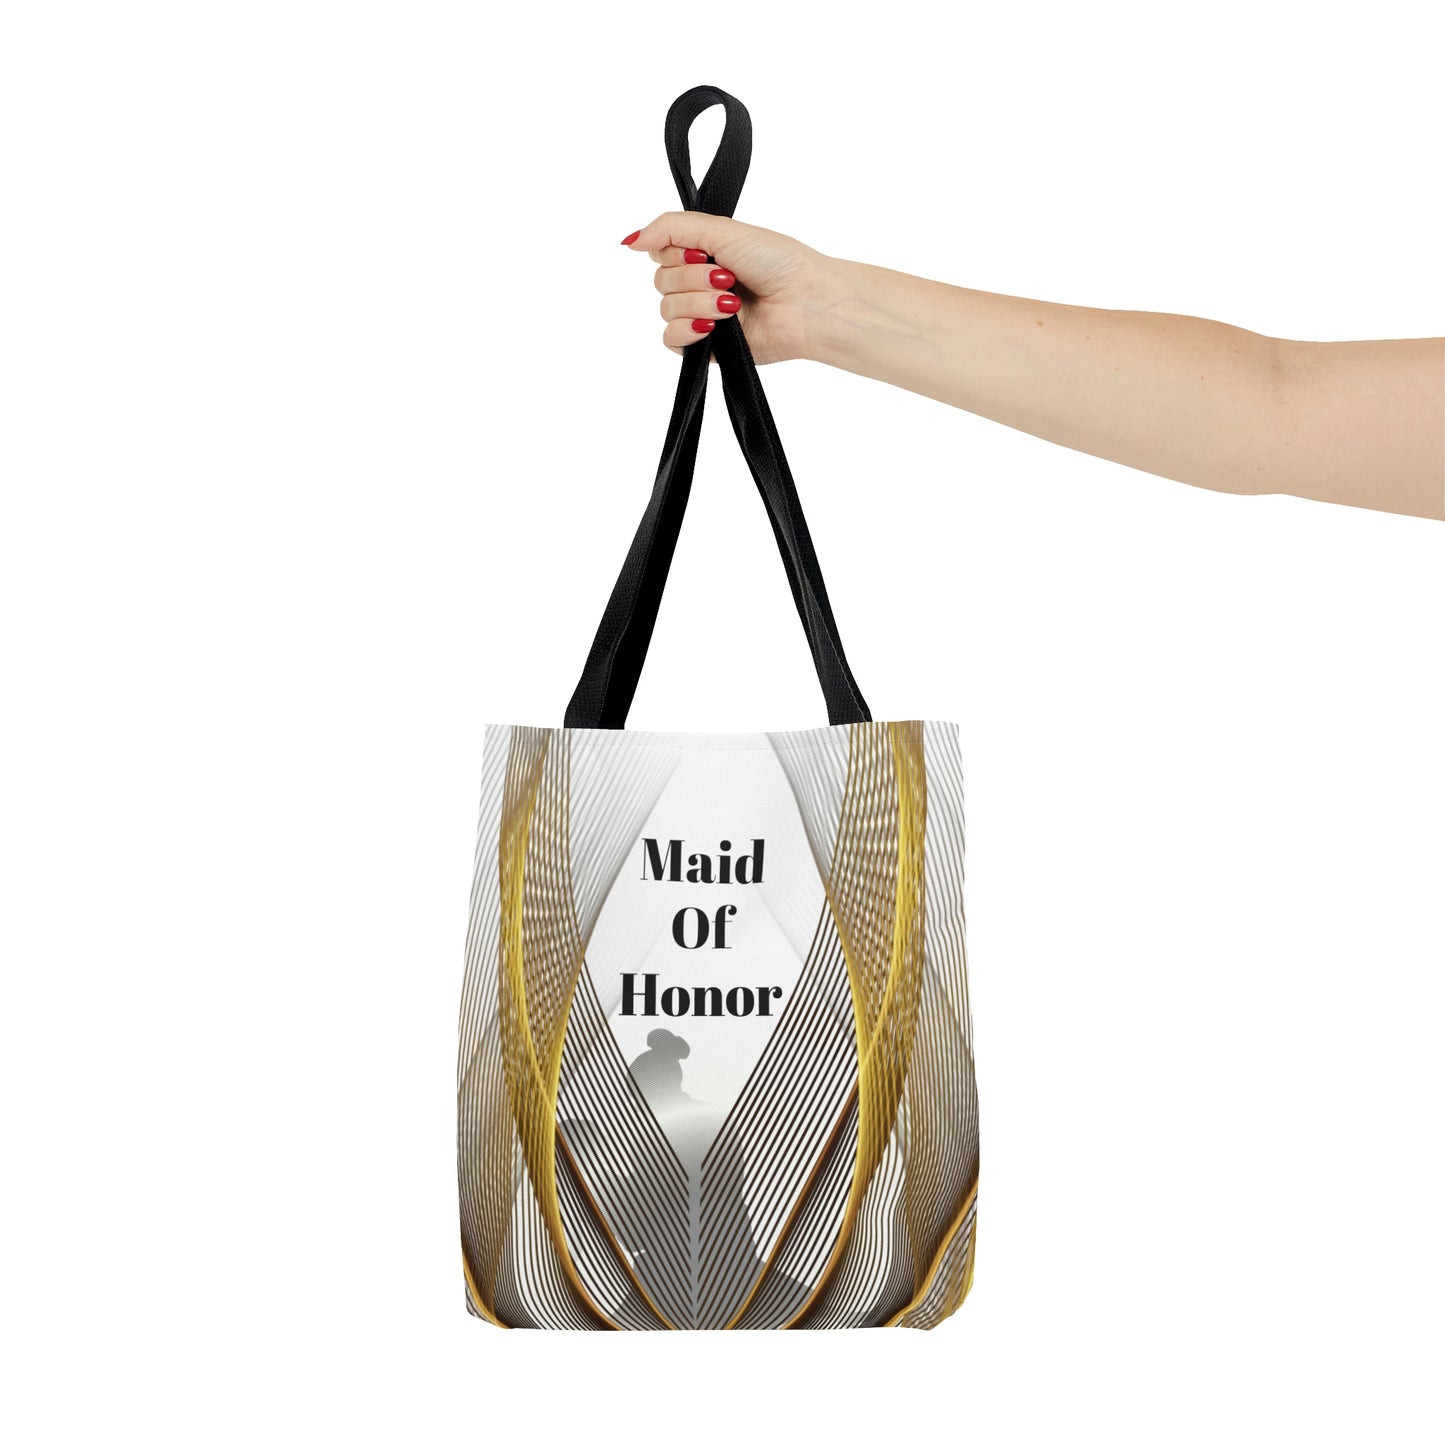 Maid Of Honor Gift Bag | White Tote | Practical Wedding Gift | Bridal Shower Gifts